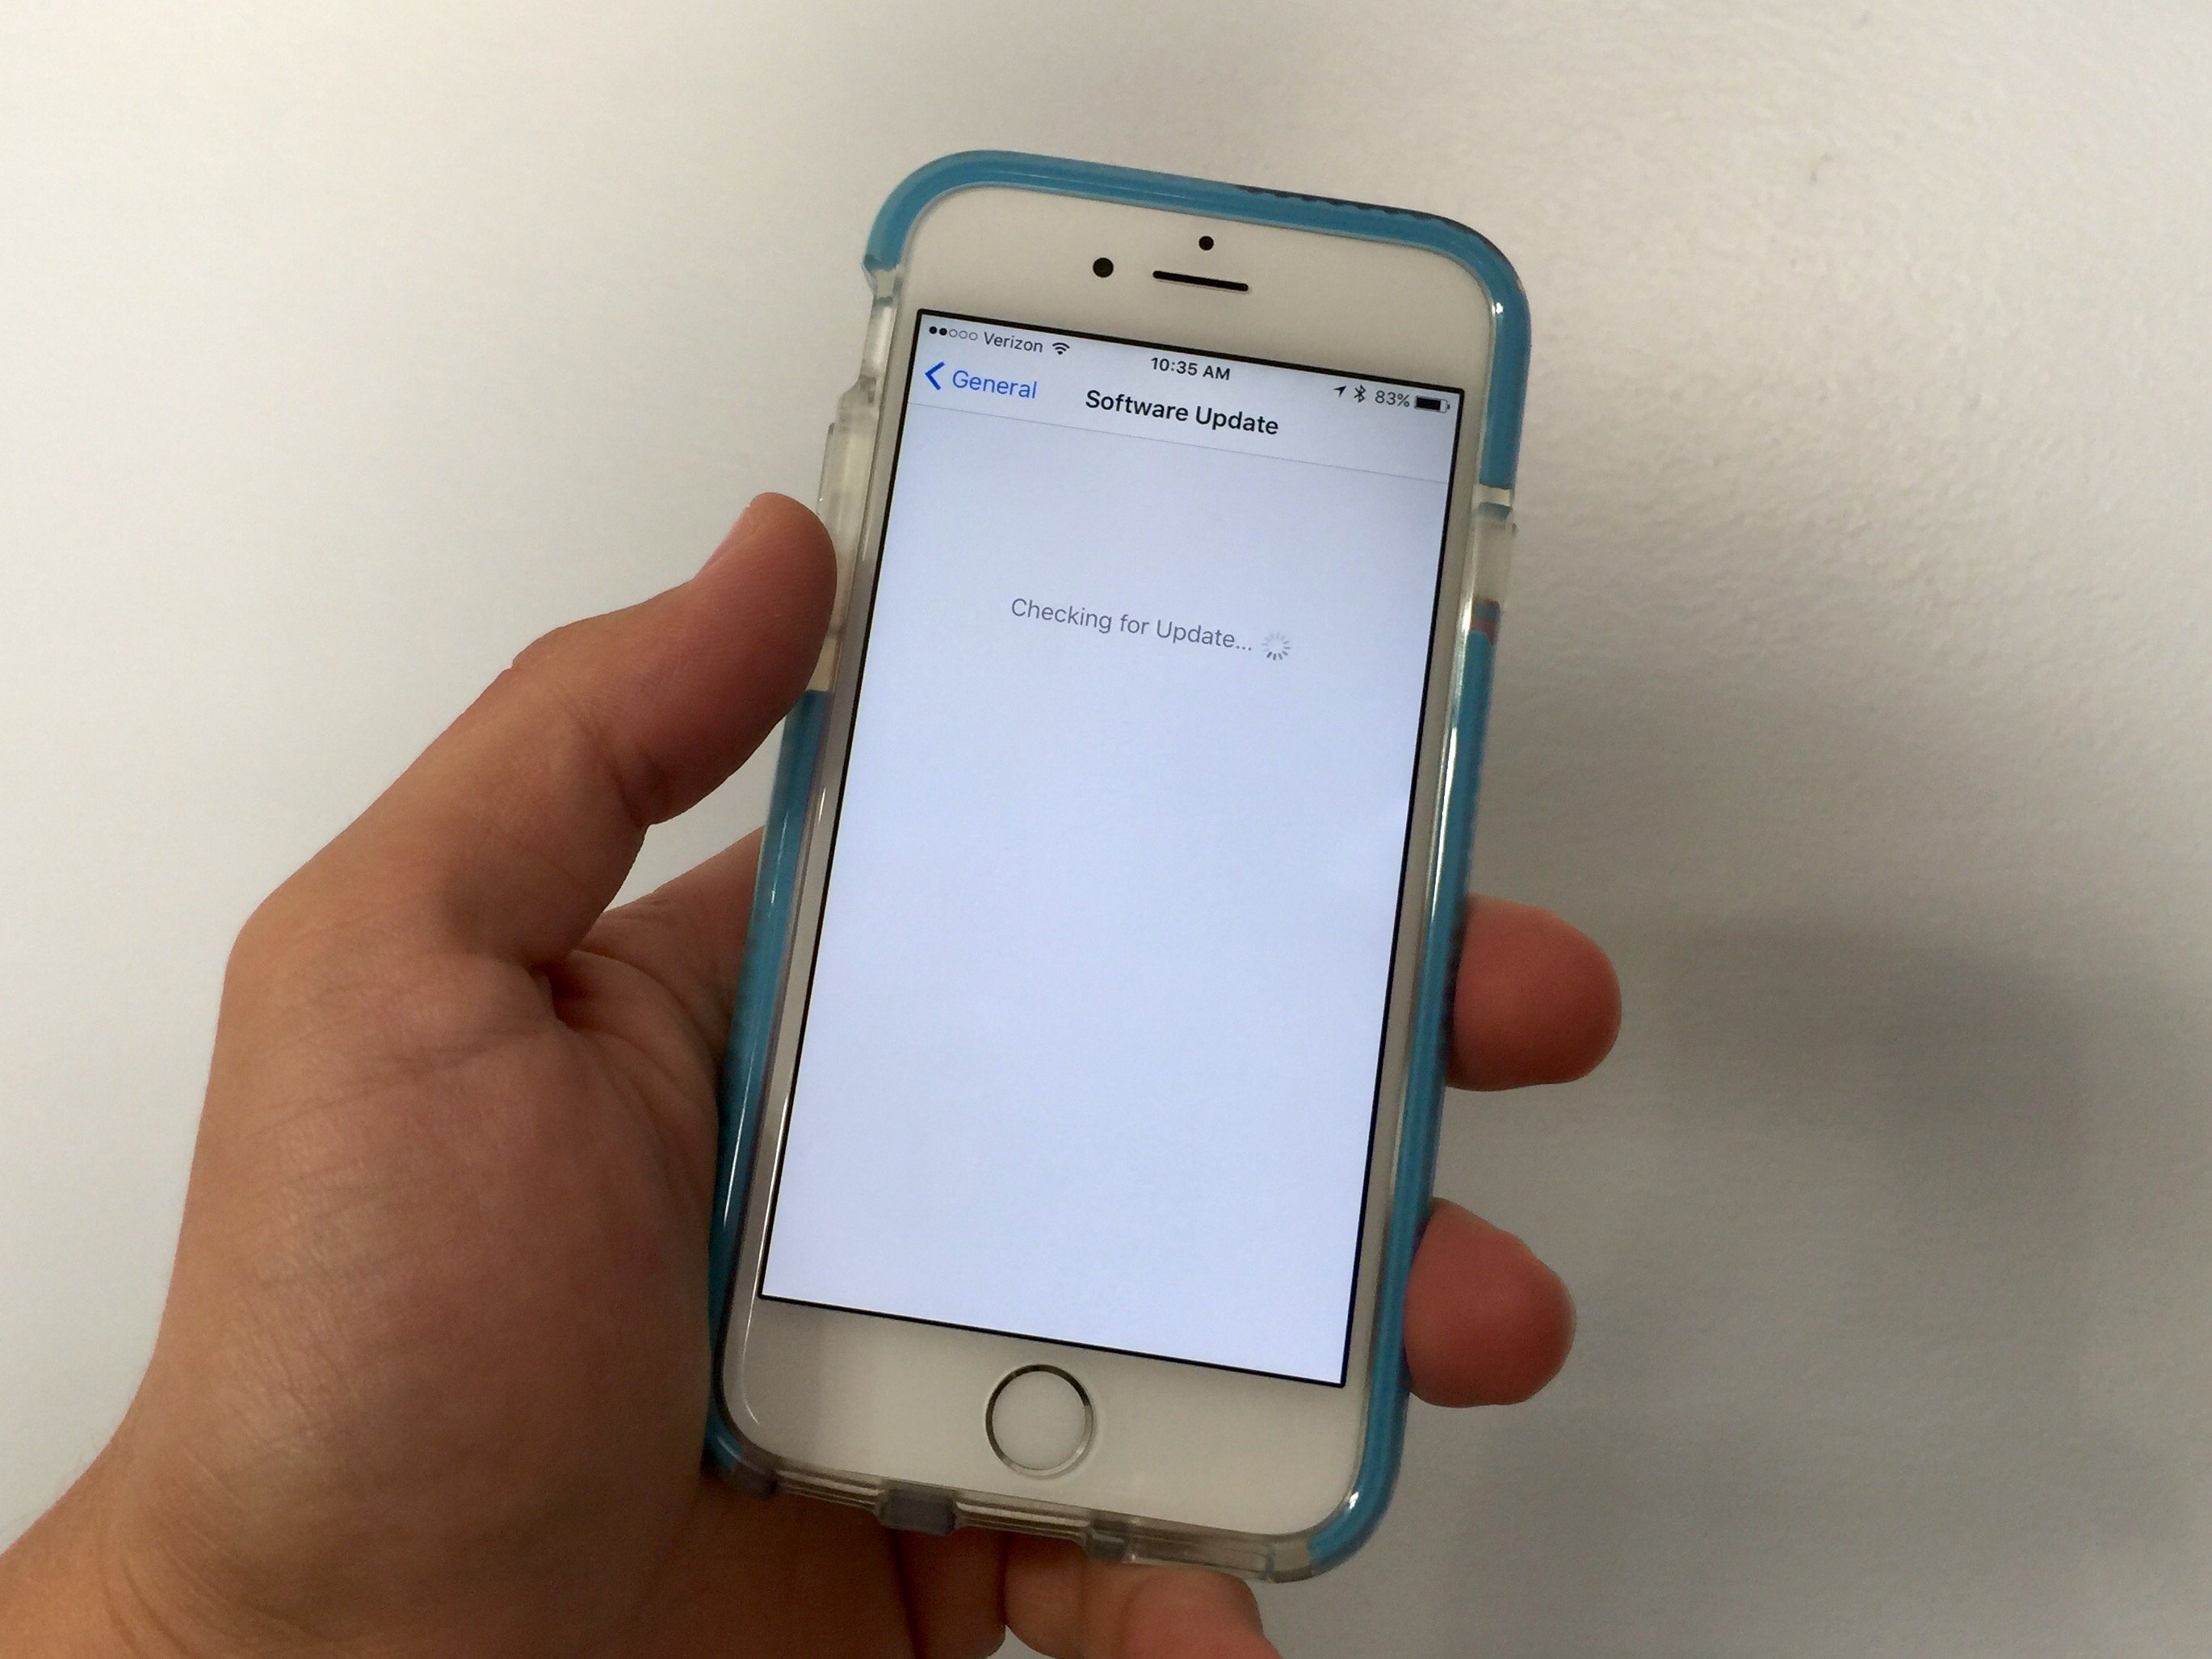 How to download iOS 9 and install the iOS 9 update.